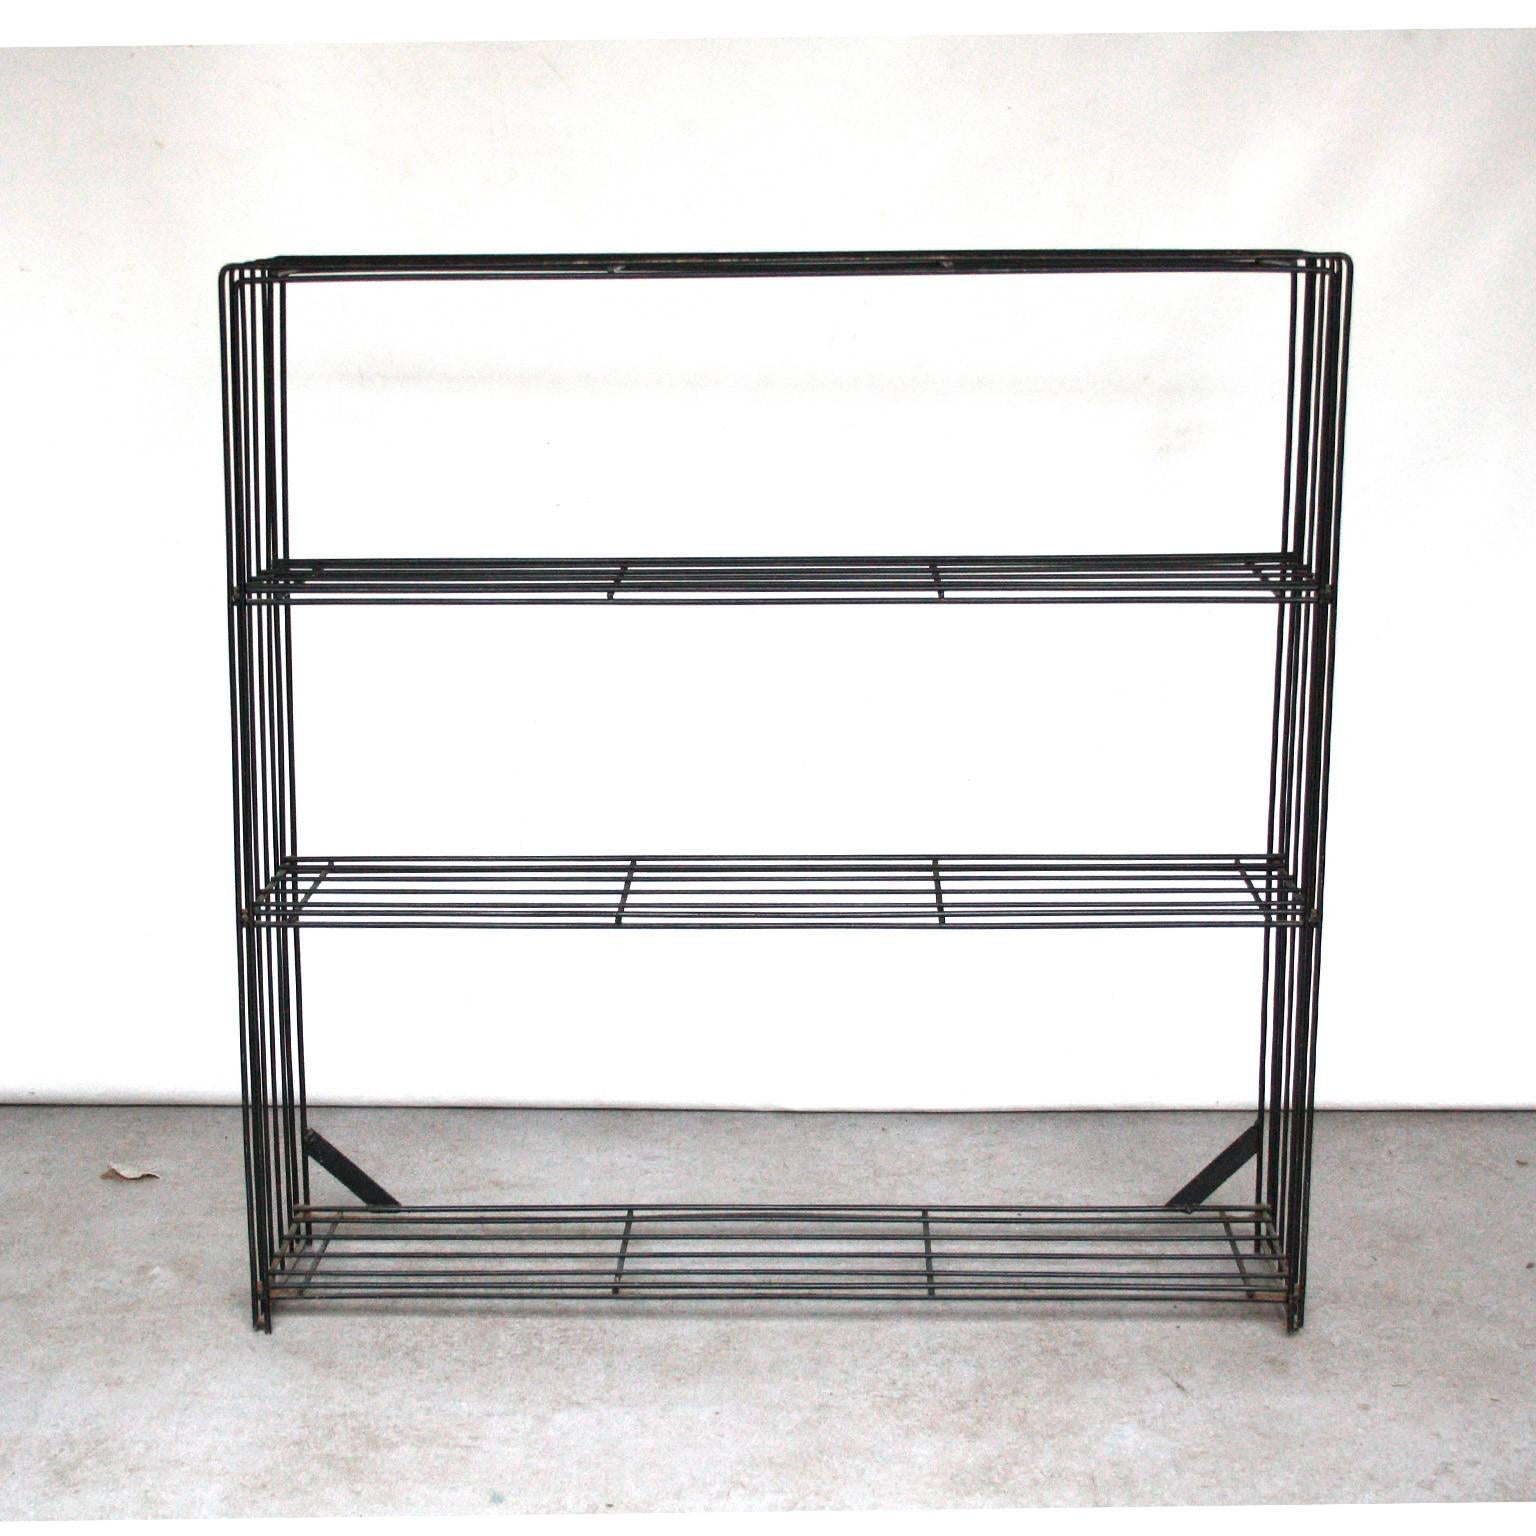 Bookcase by Tjerk Reijenga for Pilastro, Dutch Design.

Black wired metal frame. In original condition. Some wear and rust to the paint at the top. Can be easily repainted, but we like to keep it in original condition.

Because of its relatively